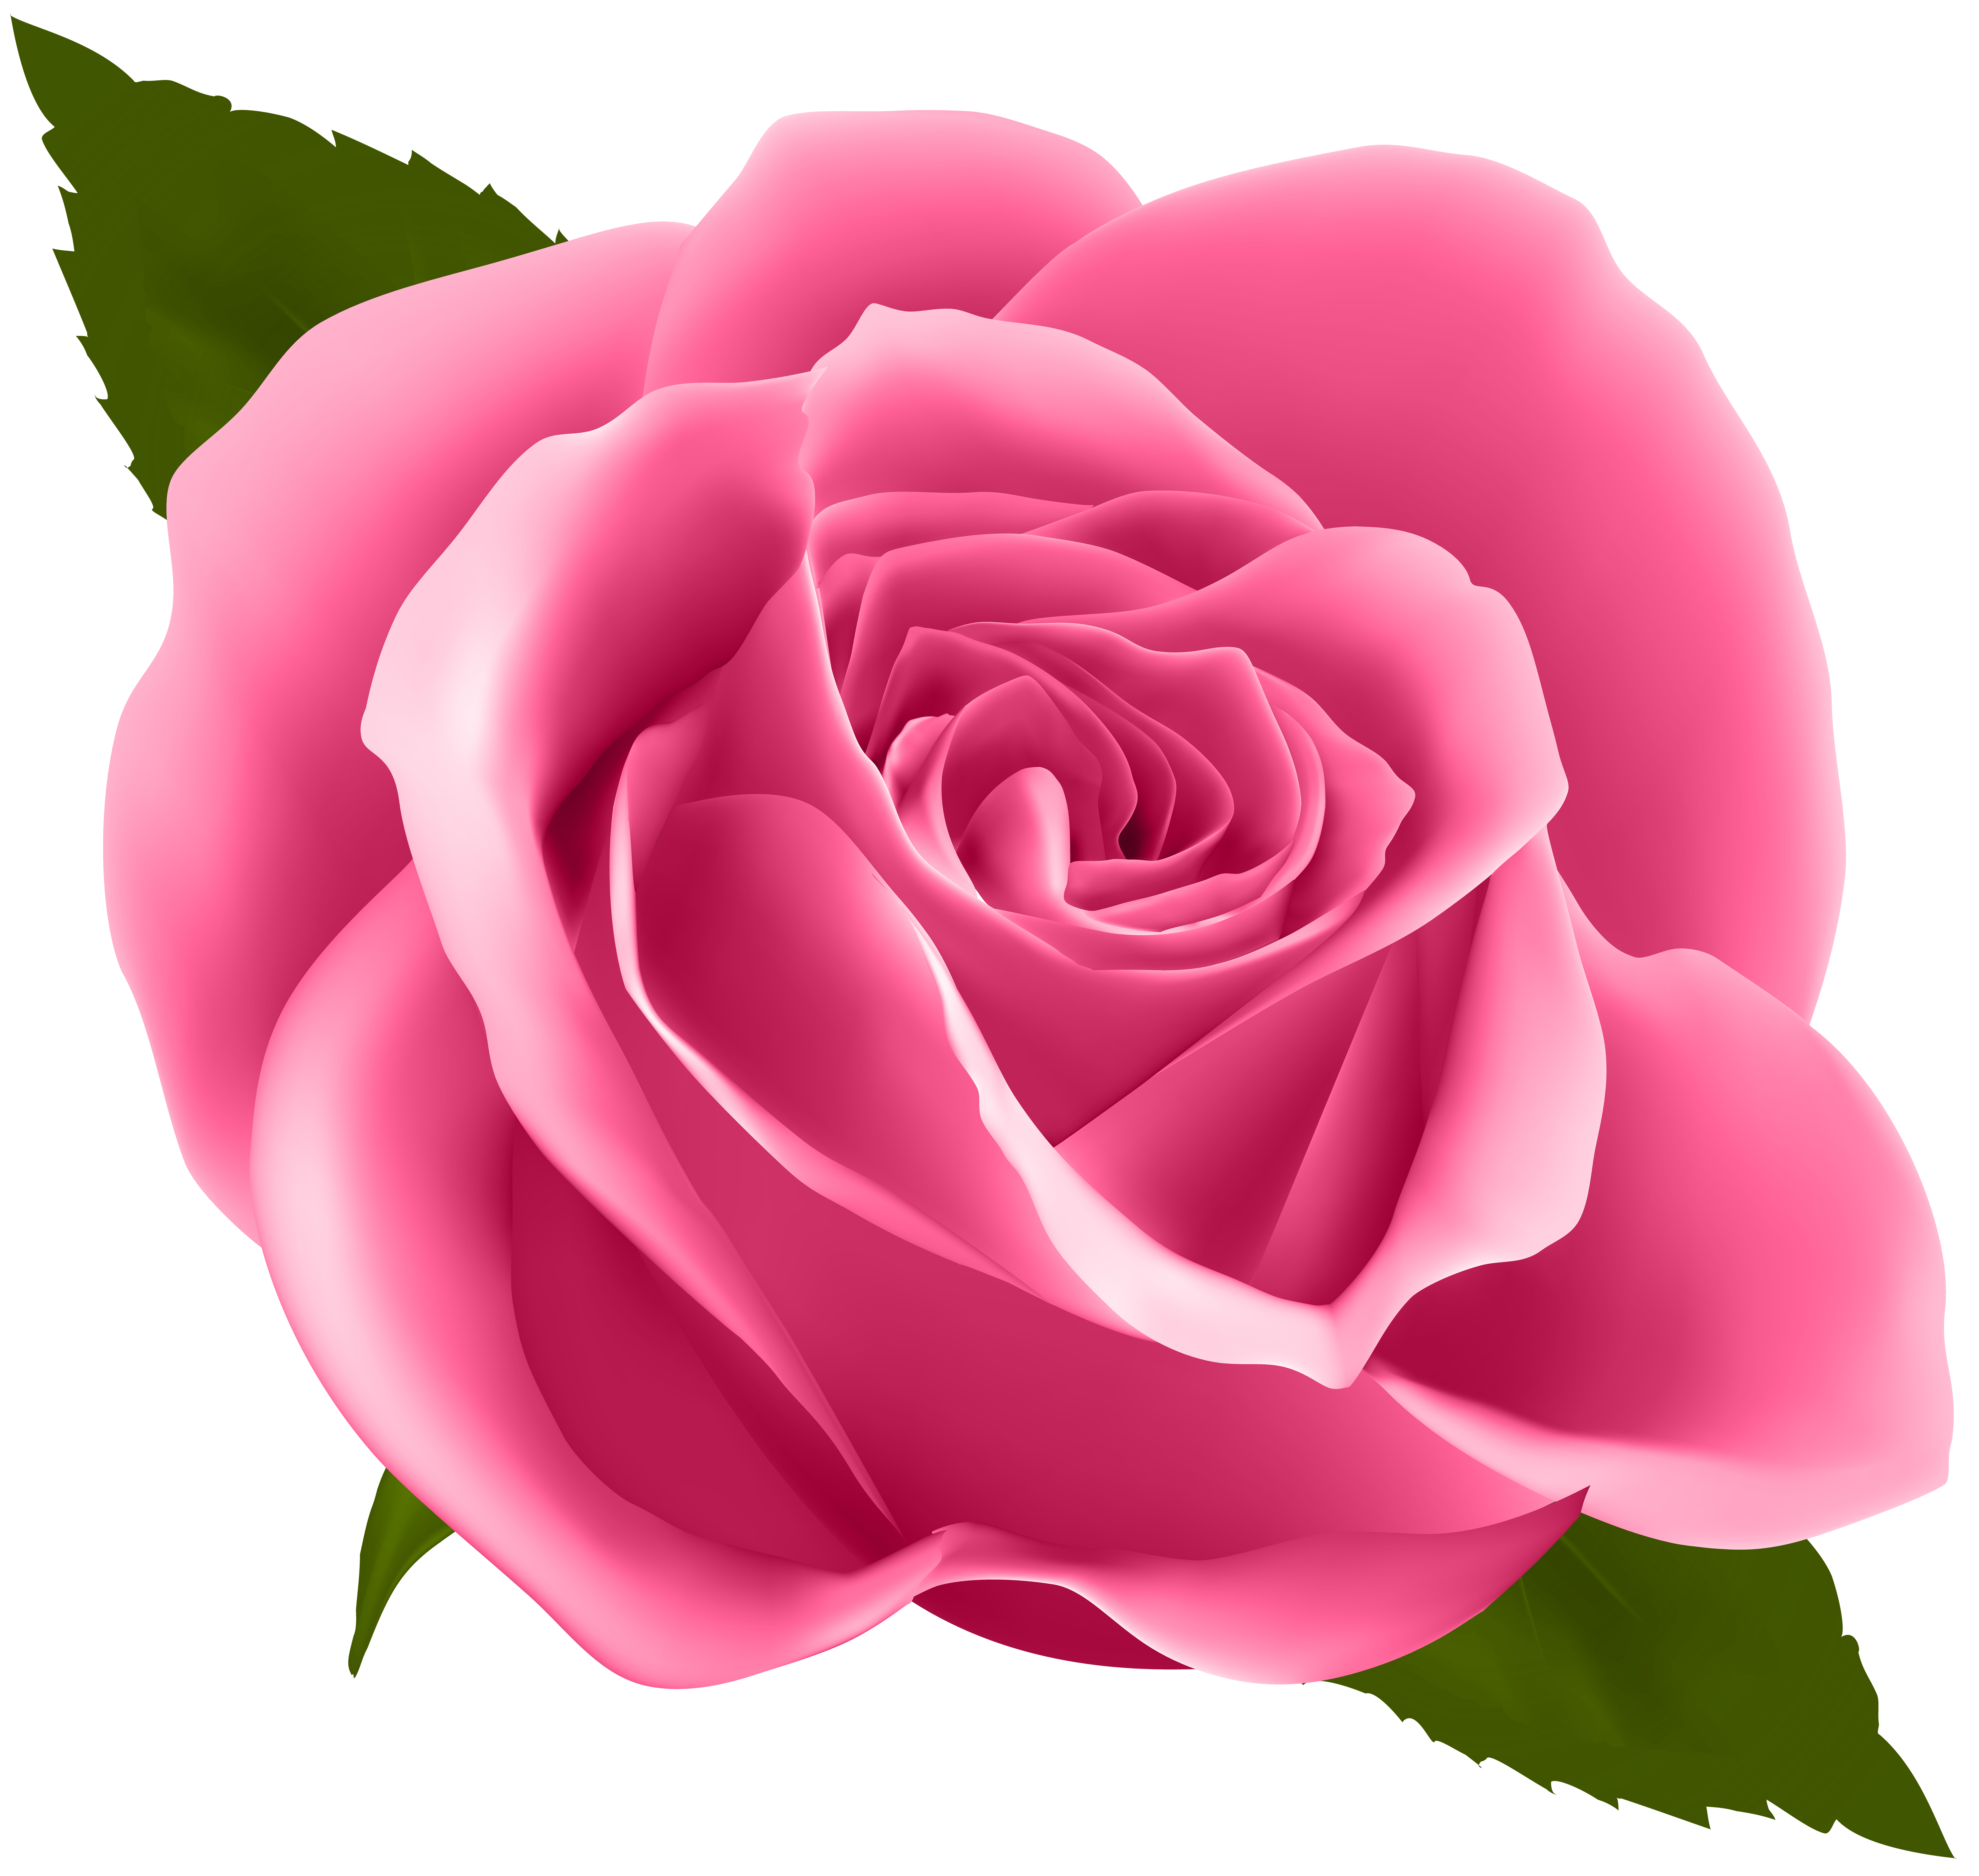 Pink Rose PNG Clip Art Image | Gallery Yopriceville - High ...